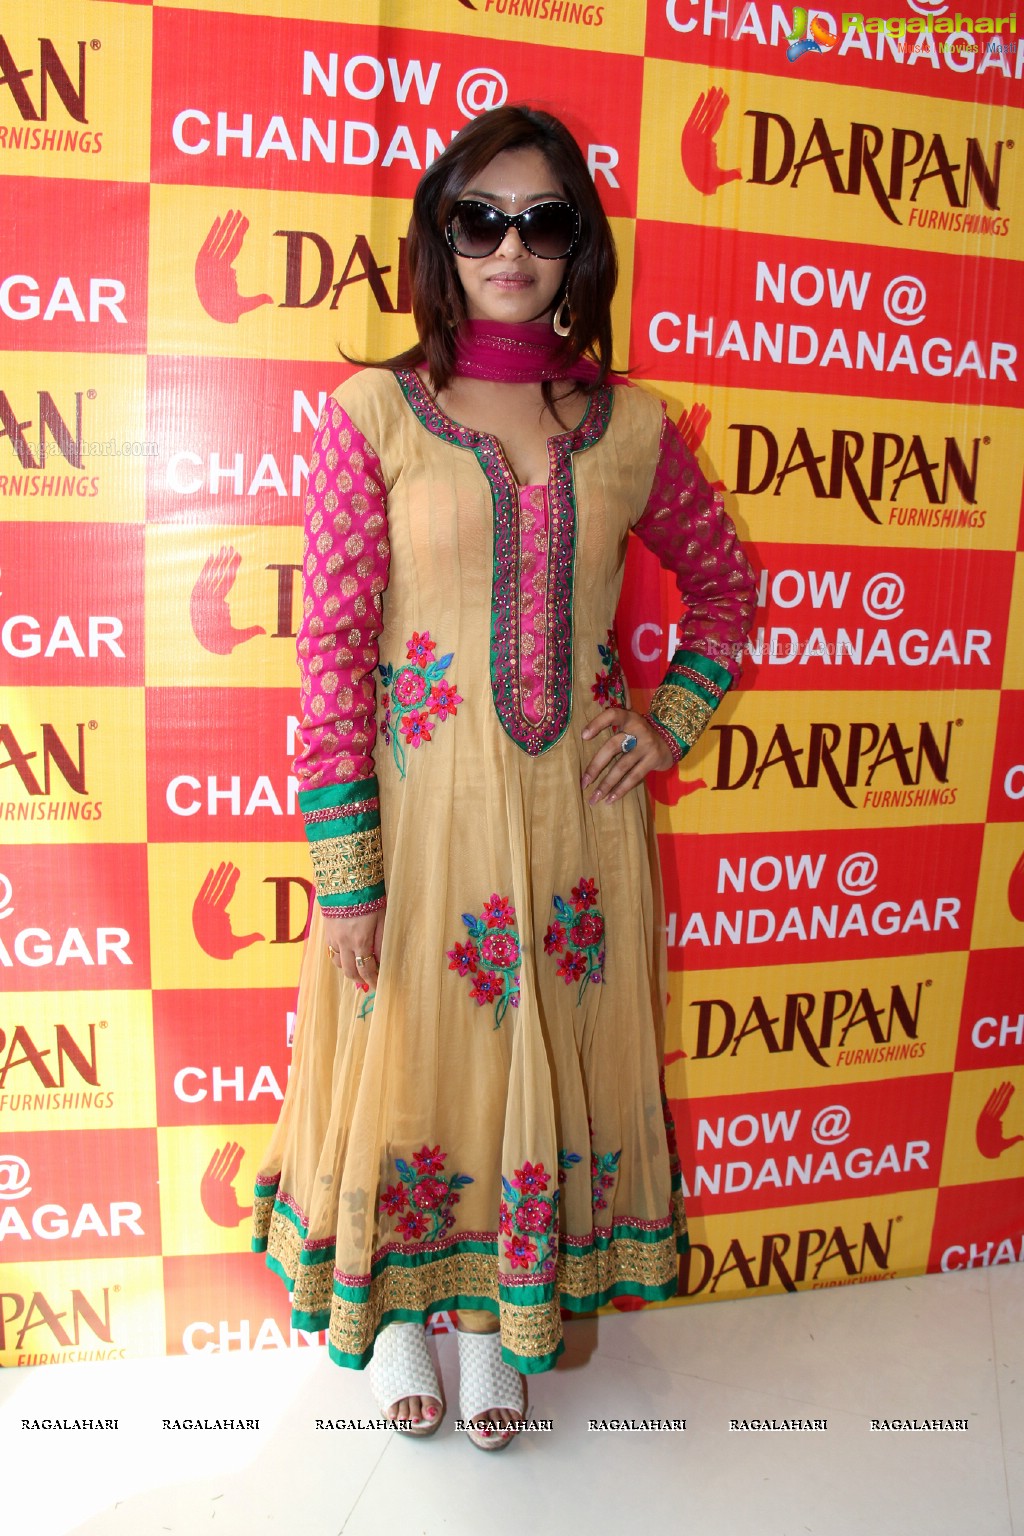 Payal Ghosh unveils Darpan Furnishings Logo and Real Value Offers